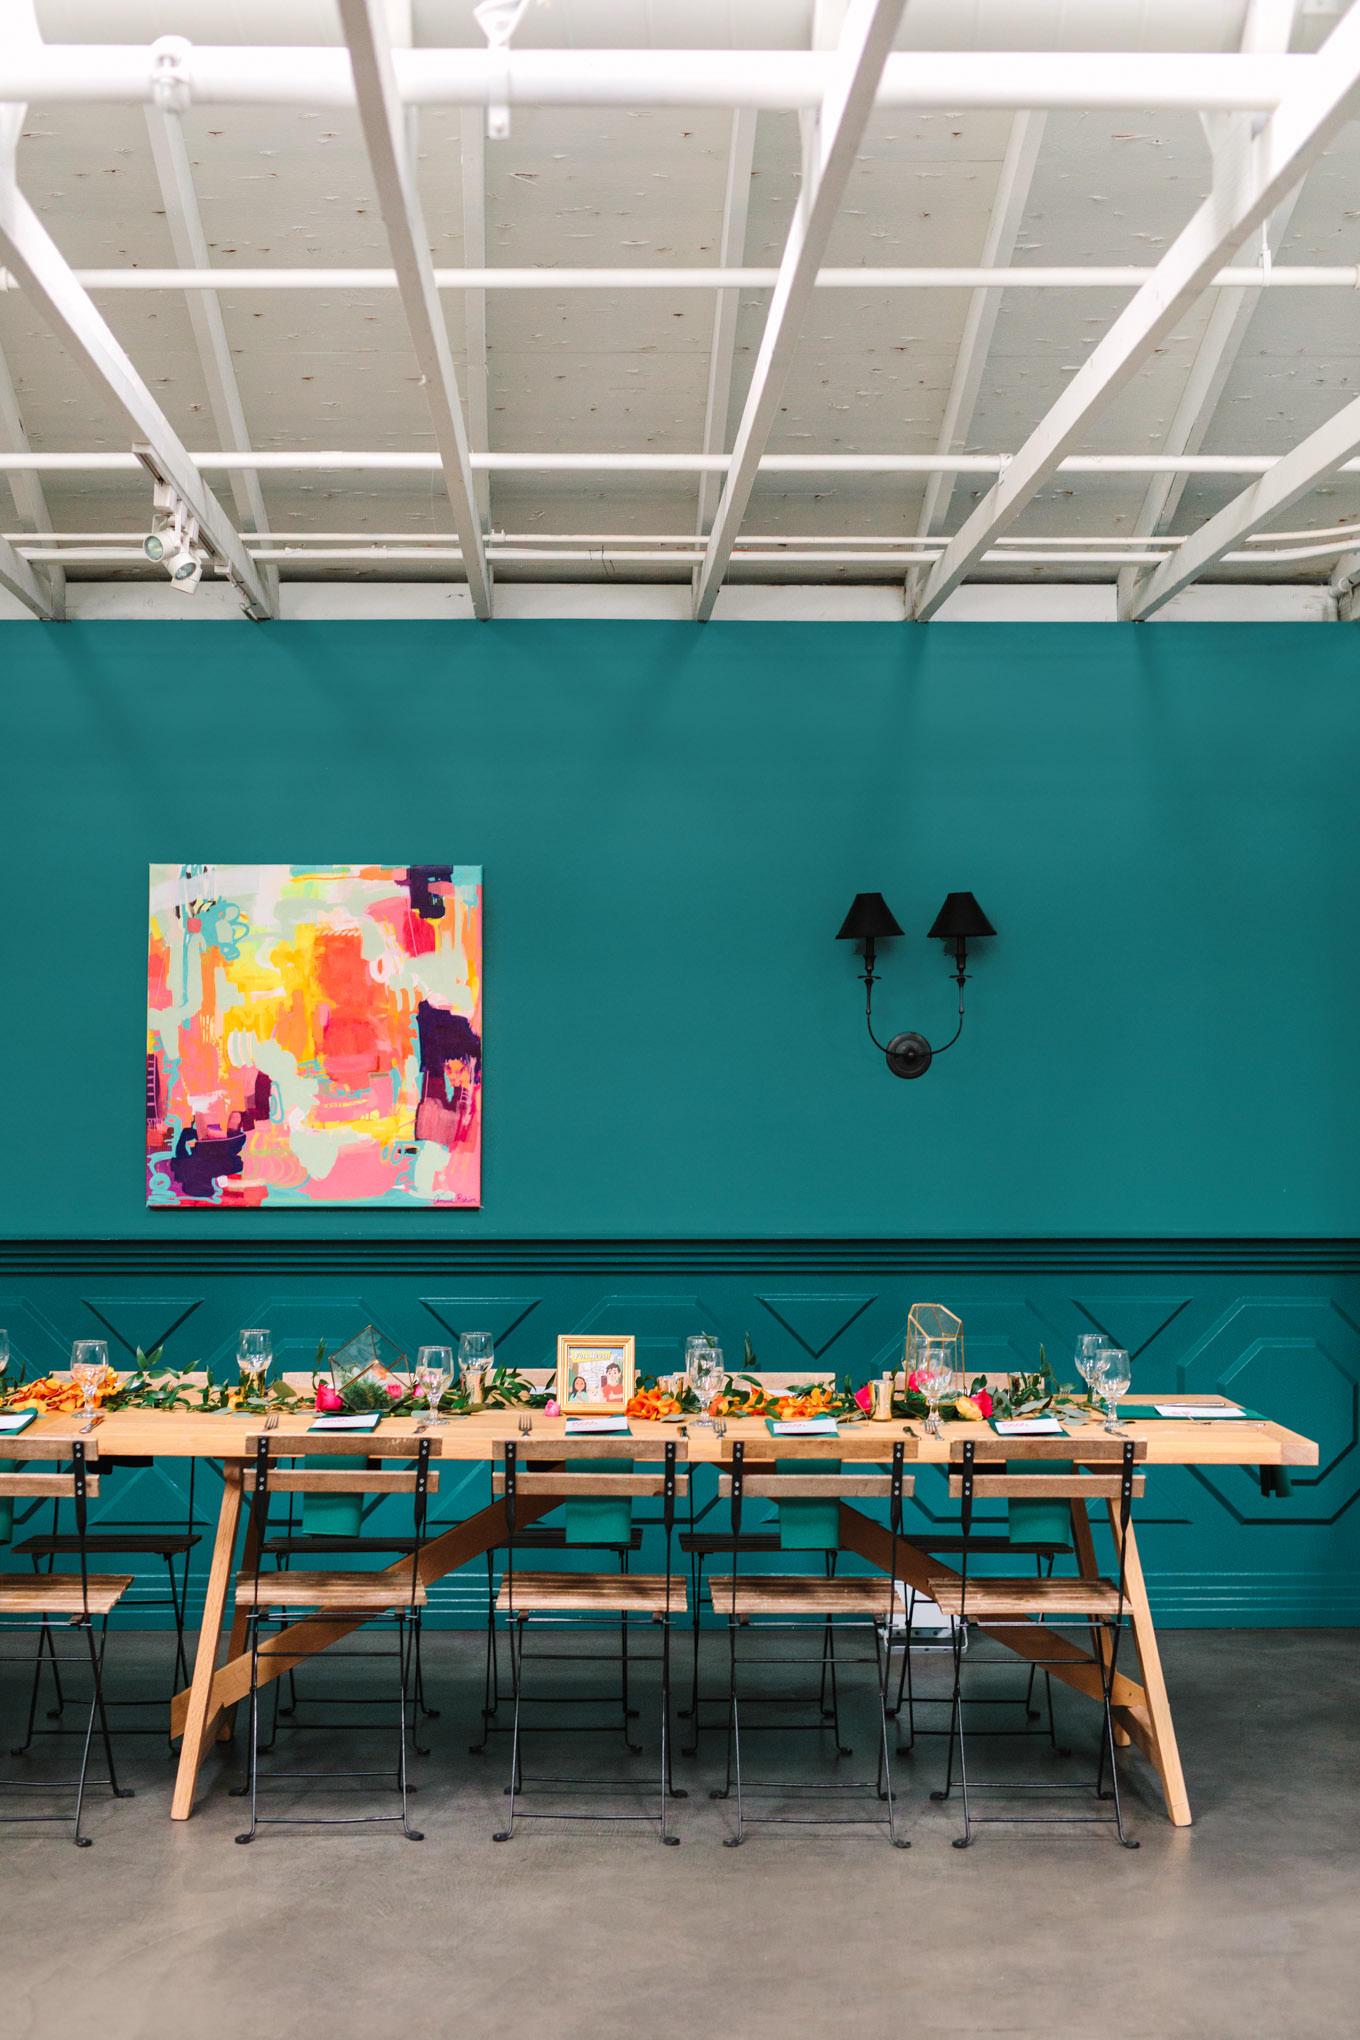 Colorful indoor reception with vibrant painting | TV inspired wedding at The Fig House Los Angeles | Published on The Knot | Fresh and colorful photography for fun-loving couples in Southern California | #losangeleswedding #TVwedding #colorfulwedding #theknot   Source: Mary Costa Photography | Los Angeles wedding photographer